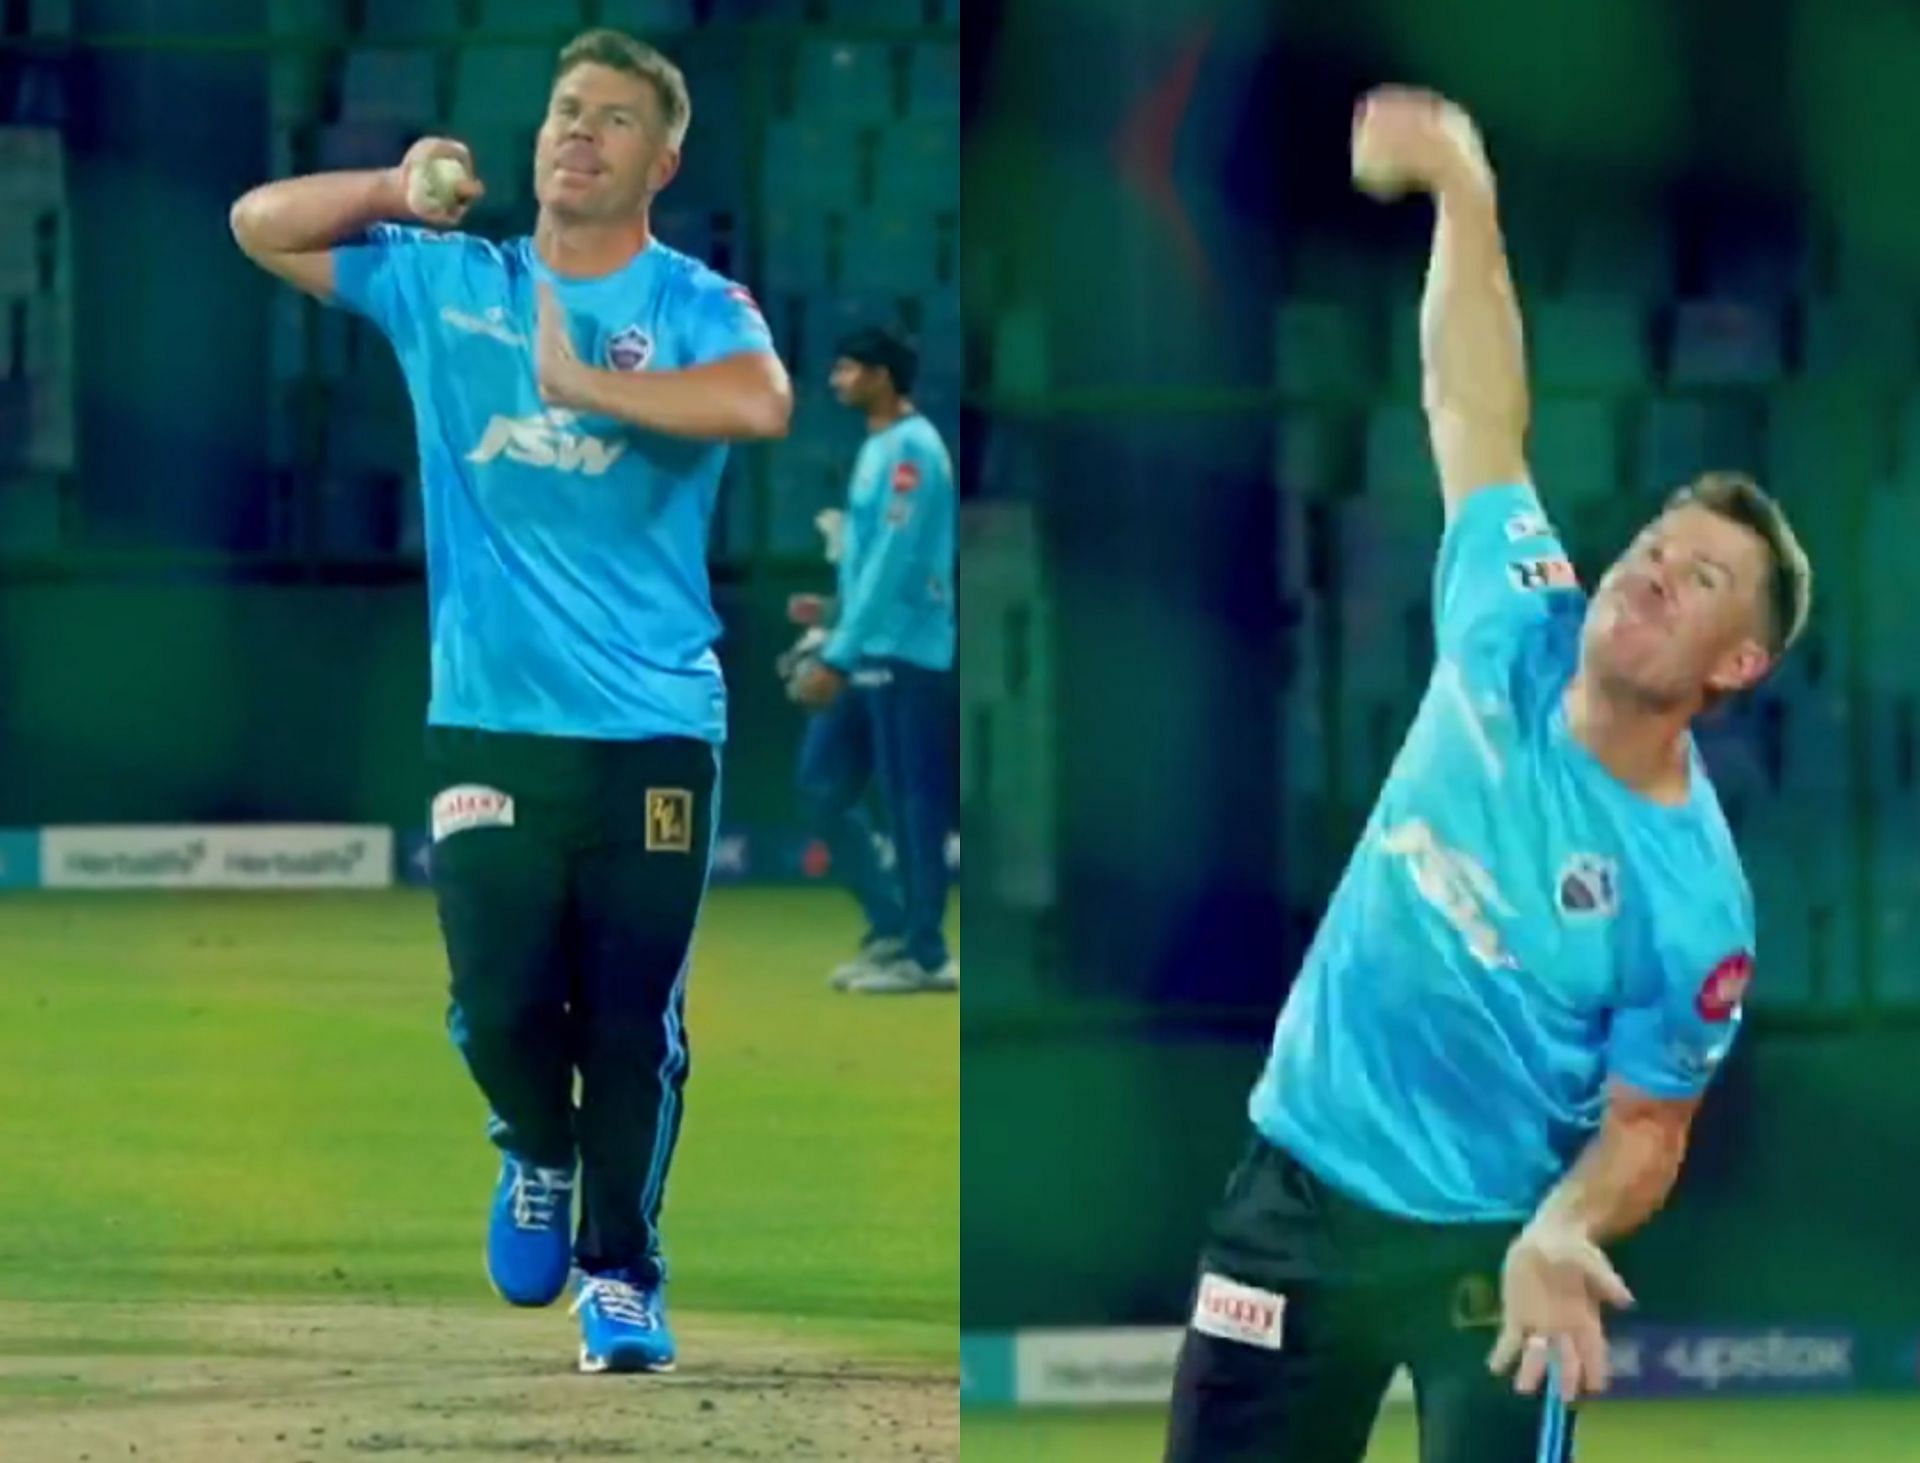 David Warner shows off his bowling skills in a net session